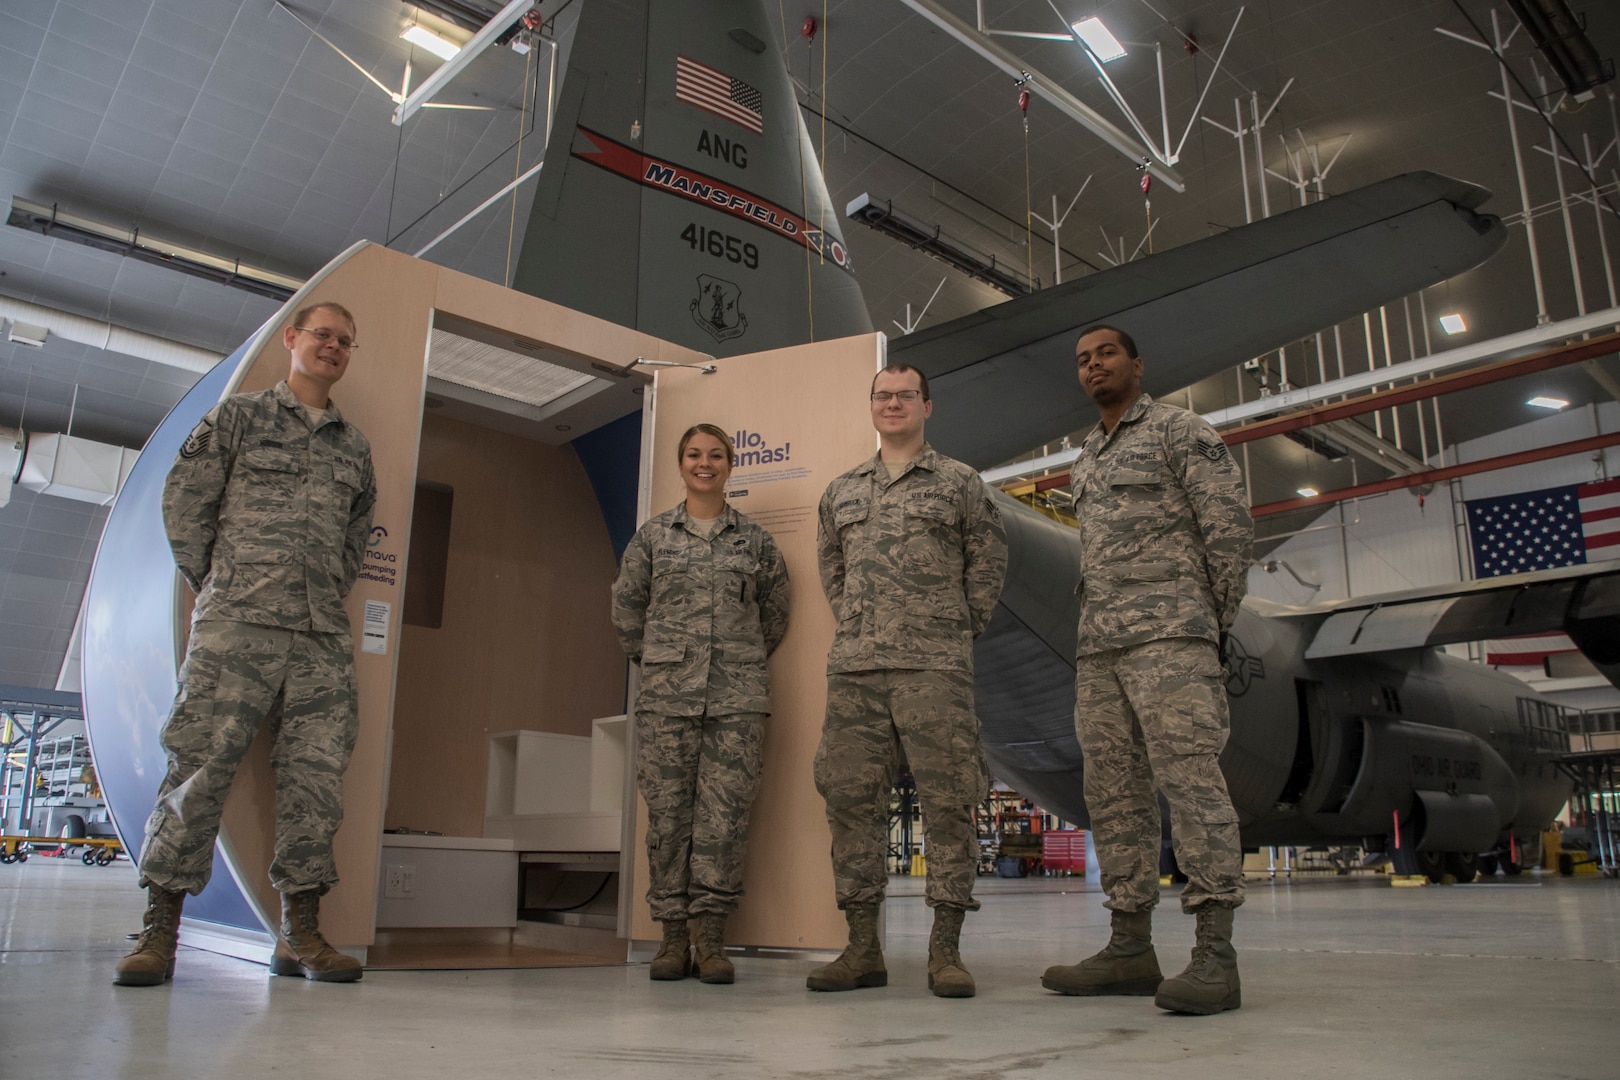 Master Sgt. Cortney R. Fleming, assigned to the 179th Airlift Wing Maintenance Group, assembles the Mamava Lactation pod with support of fellow Airmen Oct. 1, 2018, at the 179th Airlift Wing, Mansfield, Ohio. Mamava Lactation Pods are designed to provide mothers a private, clean, comfortable place to pump and breastfeed.